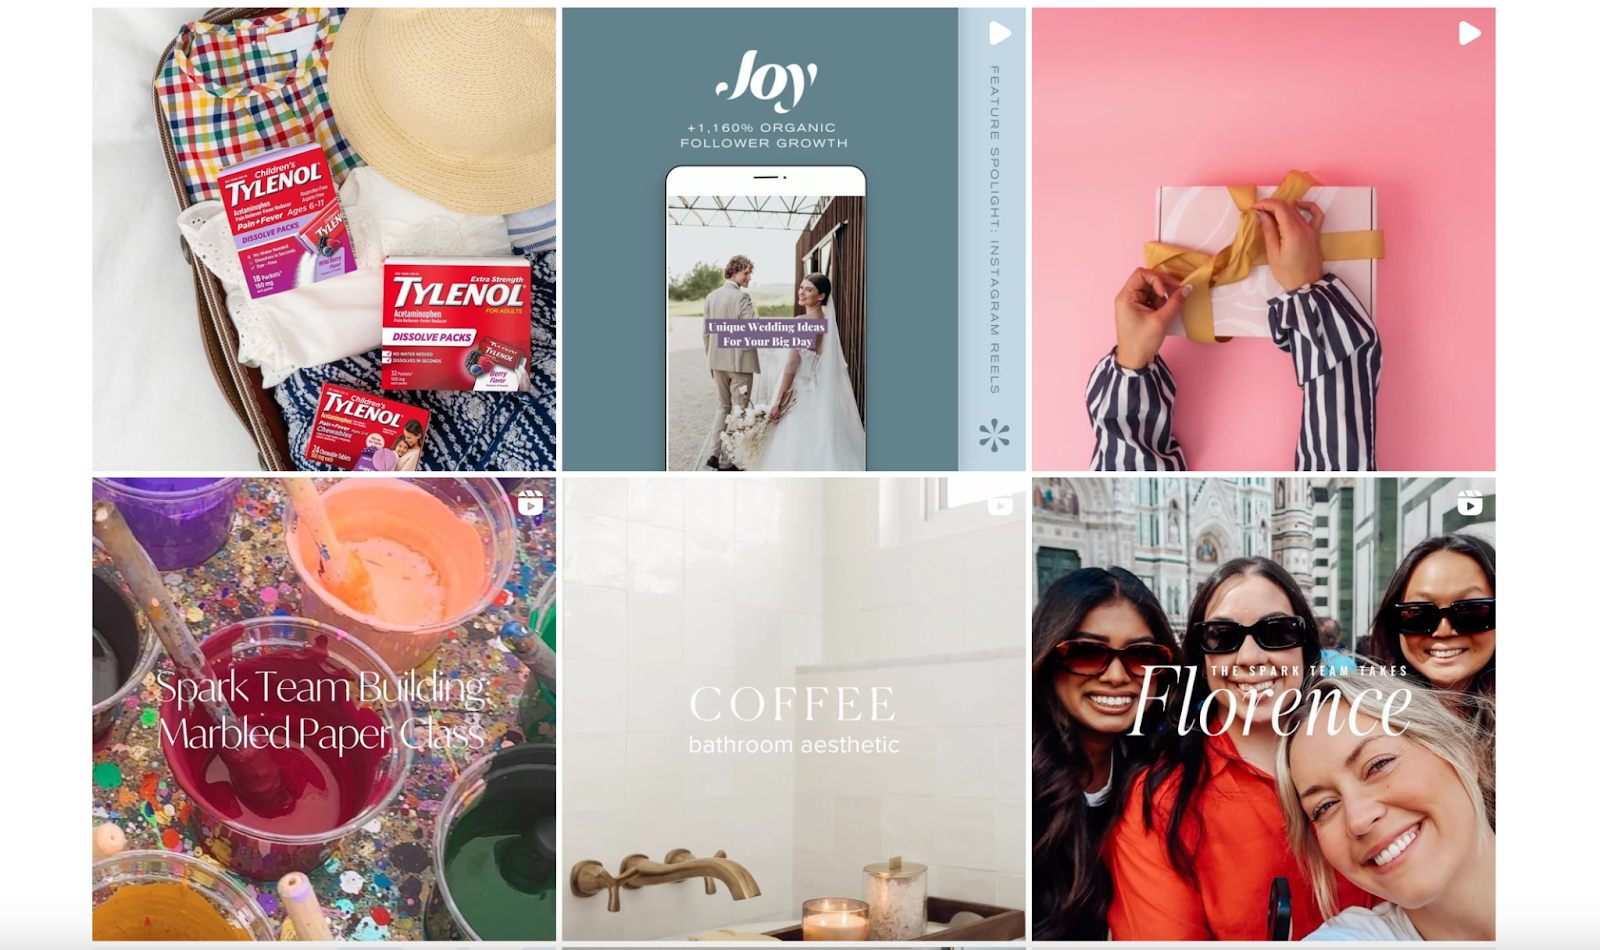 Social Media Marketing for Fashion Brands: A Strategy That Works…